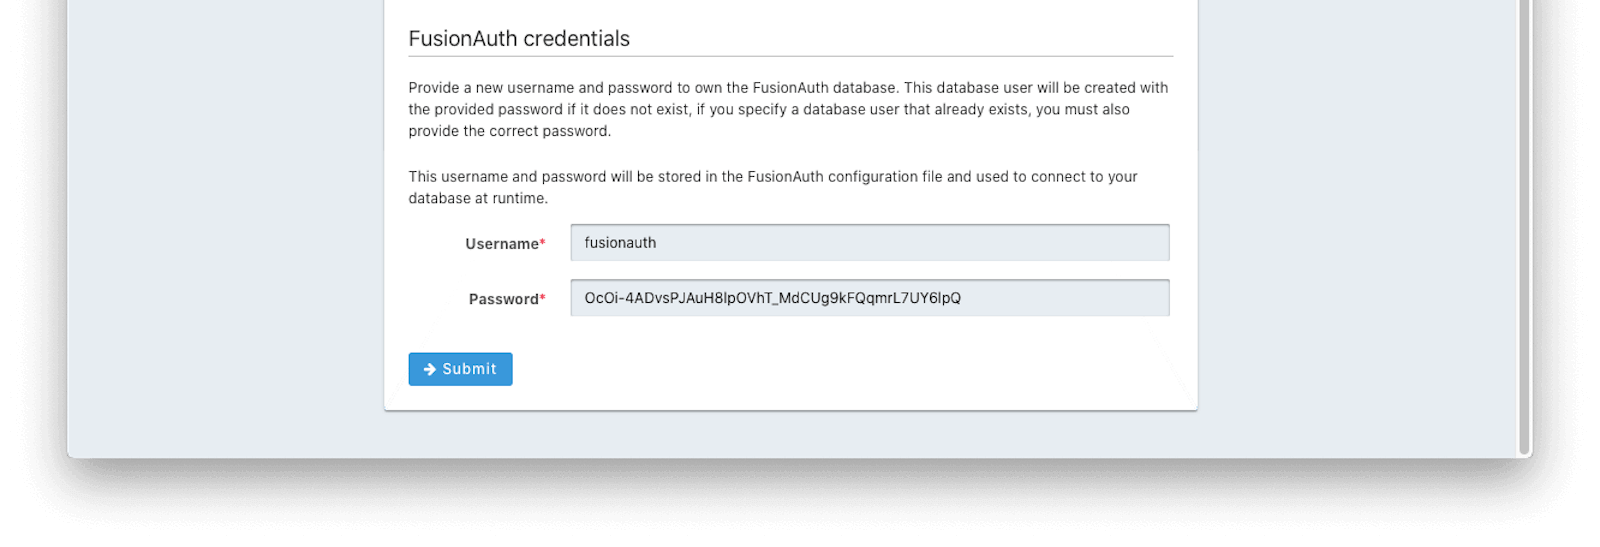 Adding a user for FusionAuth to connect as.